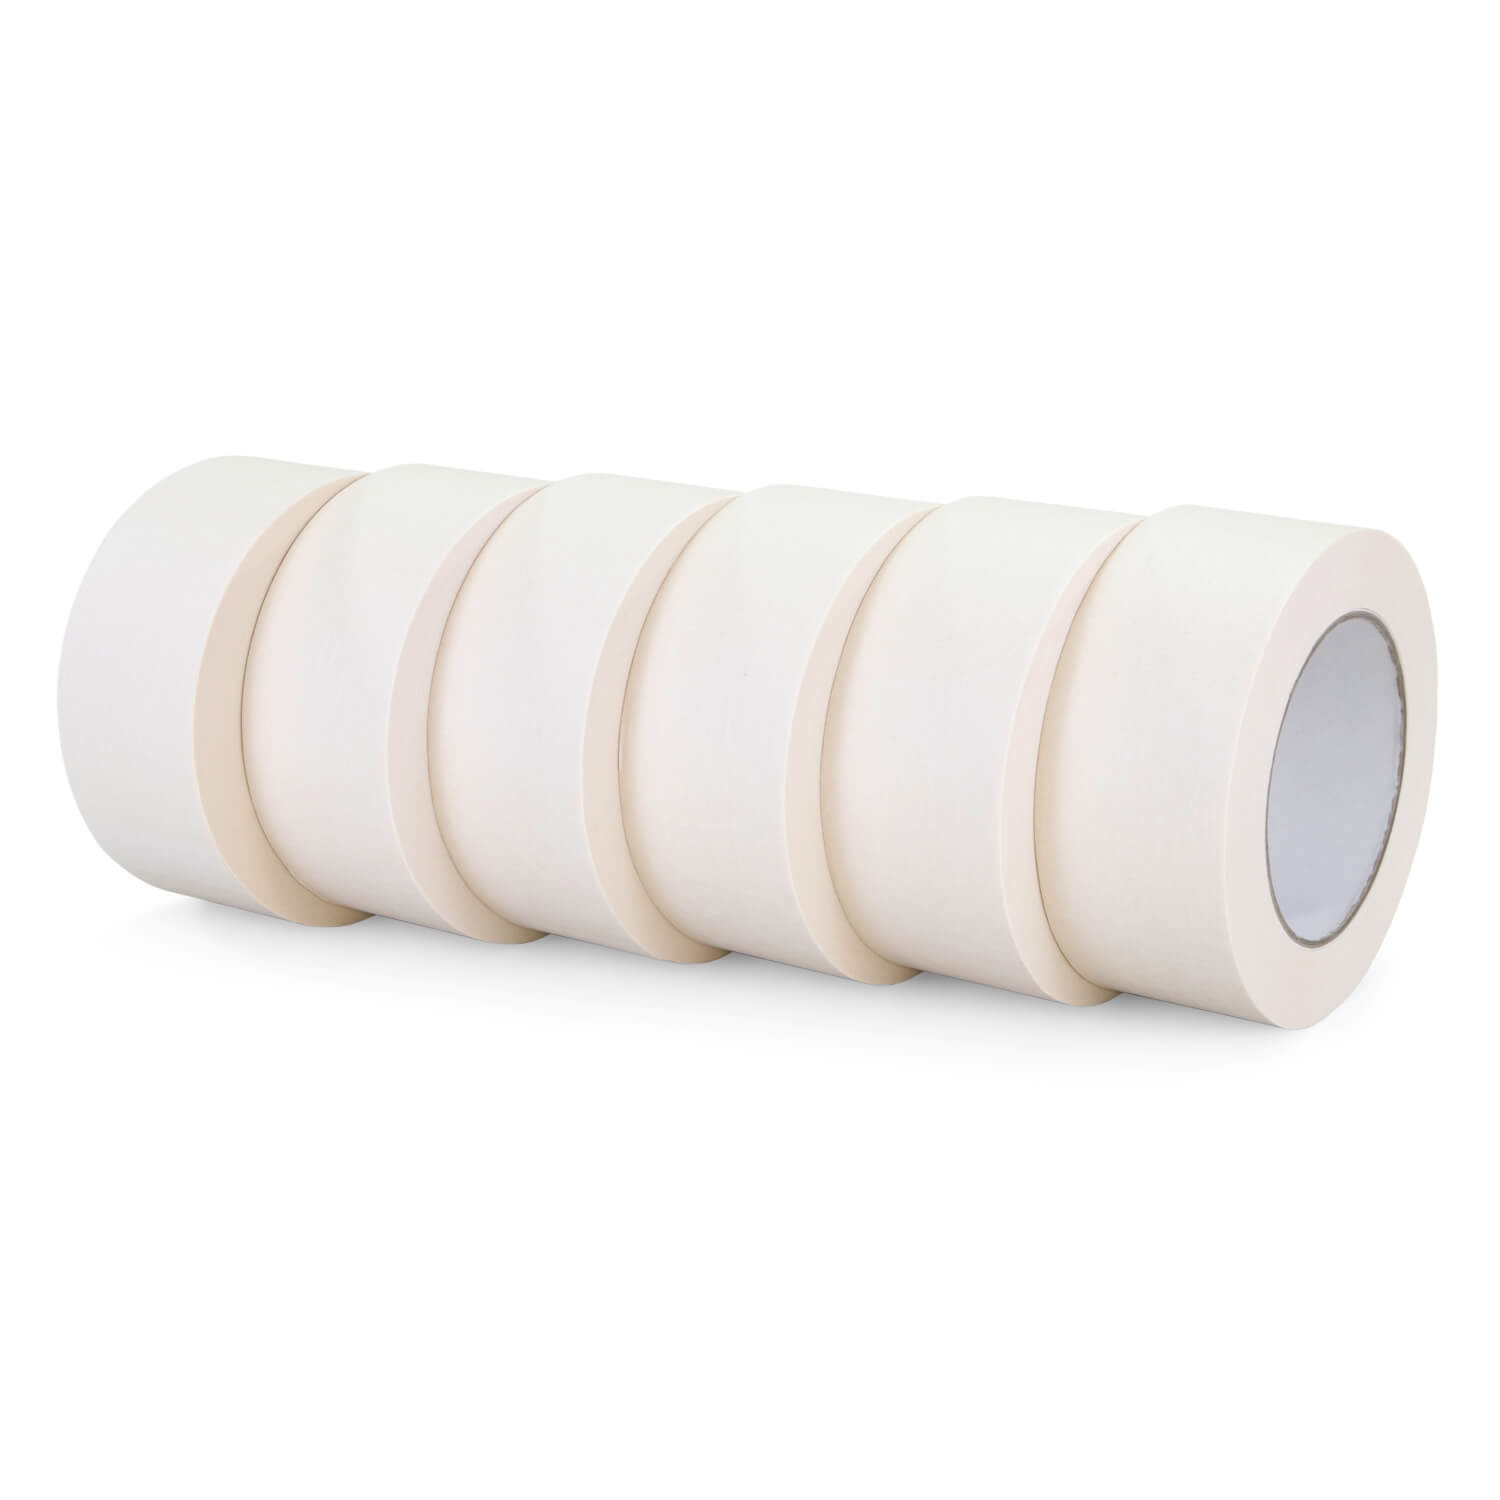 OpenHouse 2 in. x 60 ft. E-Z Up Regular Strength Painters Tape, White